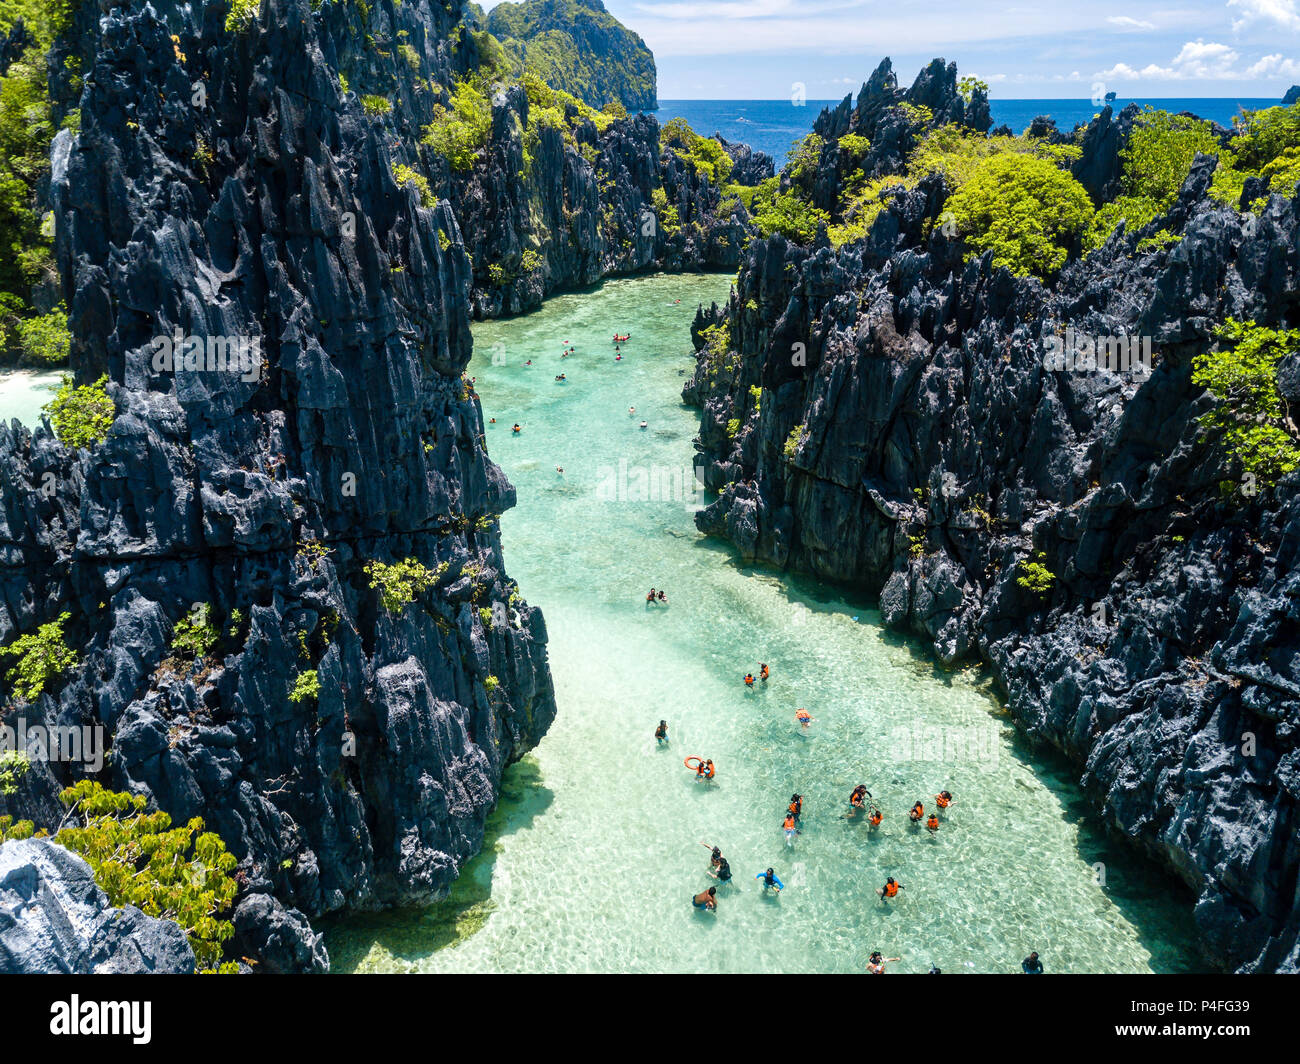 Aerial drone view of swimmers and tourists inside a beautiful, shallow tropical laggon surrounded by jagged cliffs Stock Photo